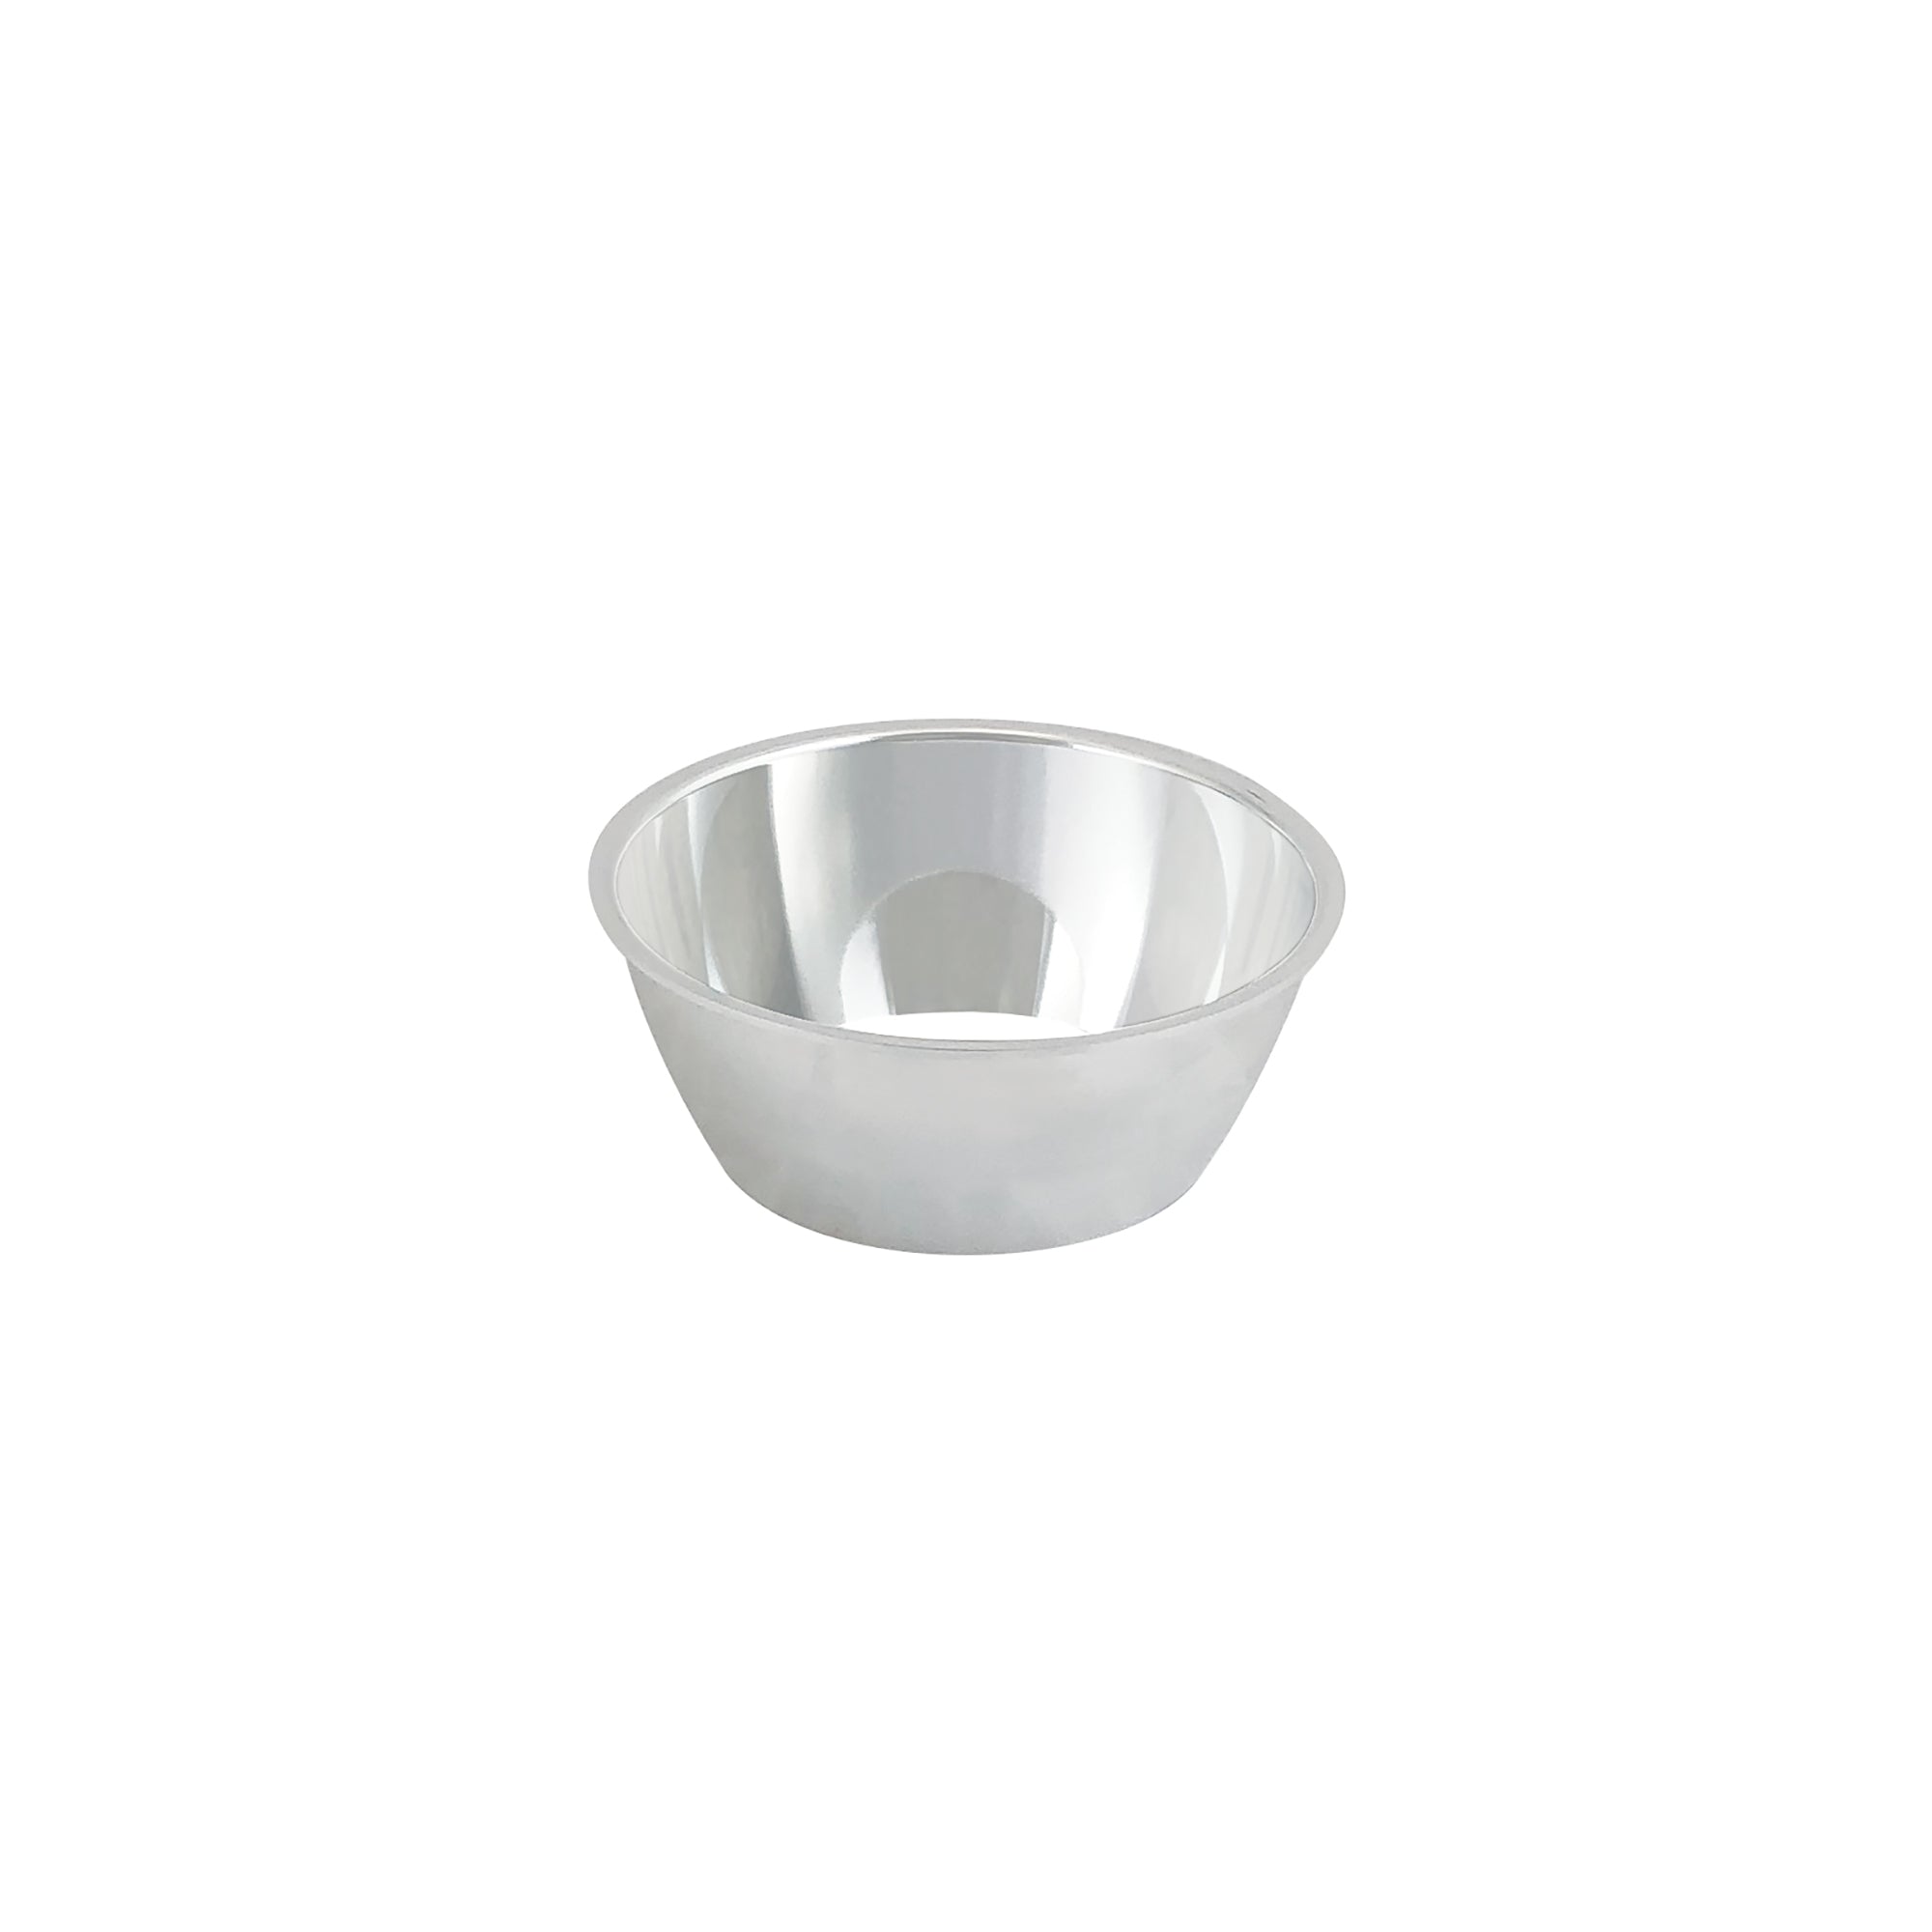 Nora Lighting LE80 - NQZ-41REFLC - Recessed - Clear